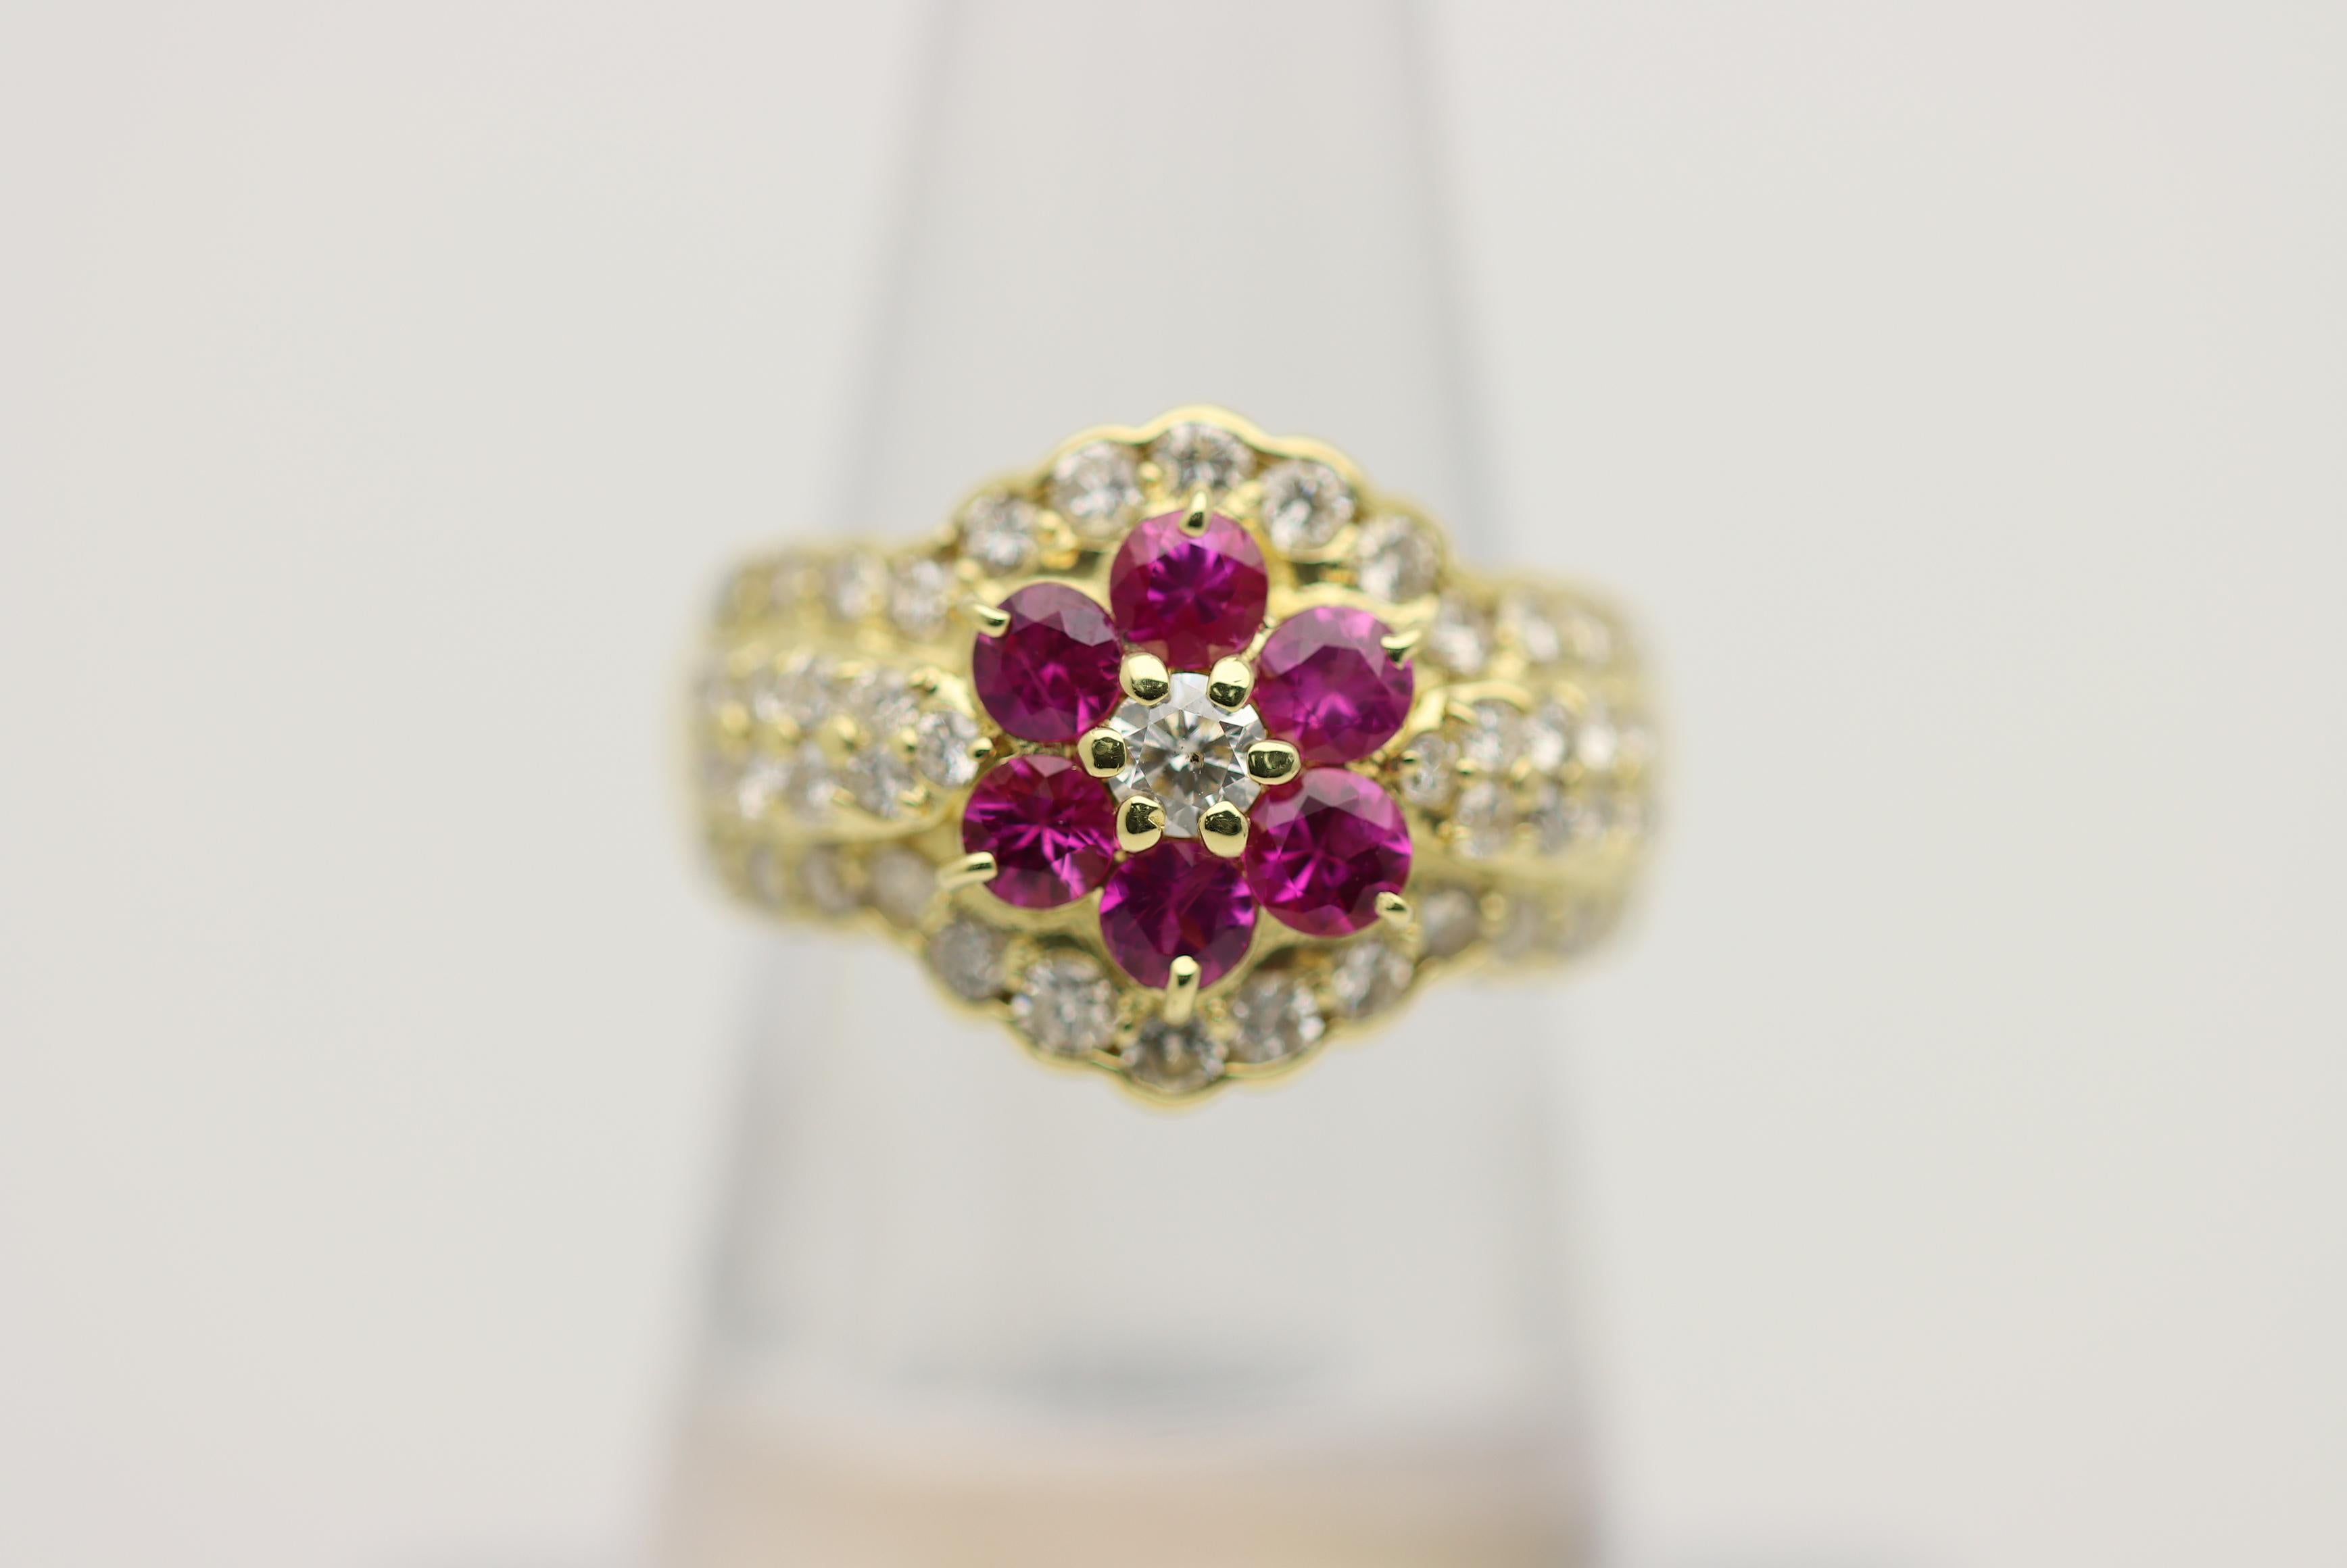 A sweet and stylish ring featuring 1.17 carats of vivid red rubies set in a flower pattern. It is further accented by 1.16 carats of round brilliant-cut diamonds creating adding sparkle and brilliance to the piece. Made in 18k yellow gold and ready